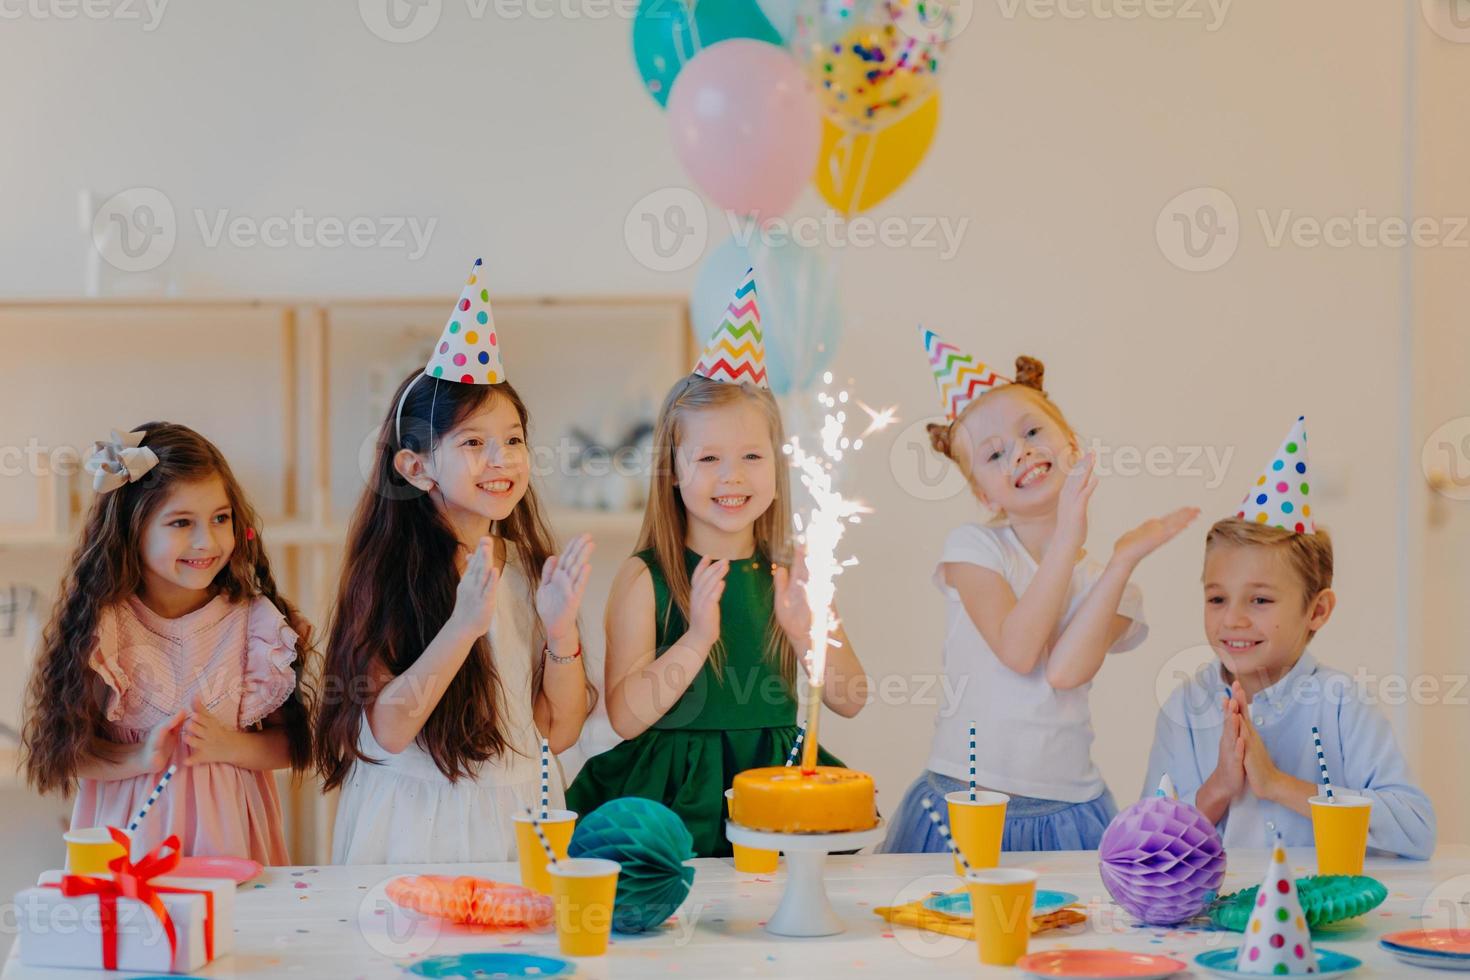 Children and holiday concept. Glad five friends look gladfully on cake with sparkle, celebrate birthday, wear party cone hats and hold air balloons, have happy expressions photo